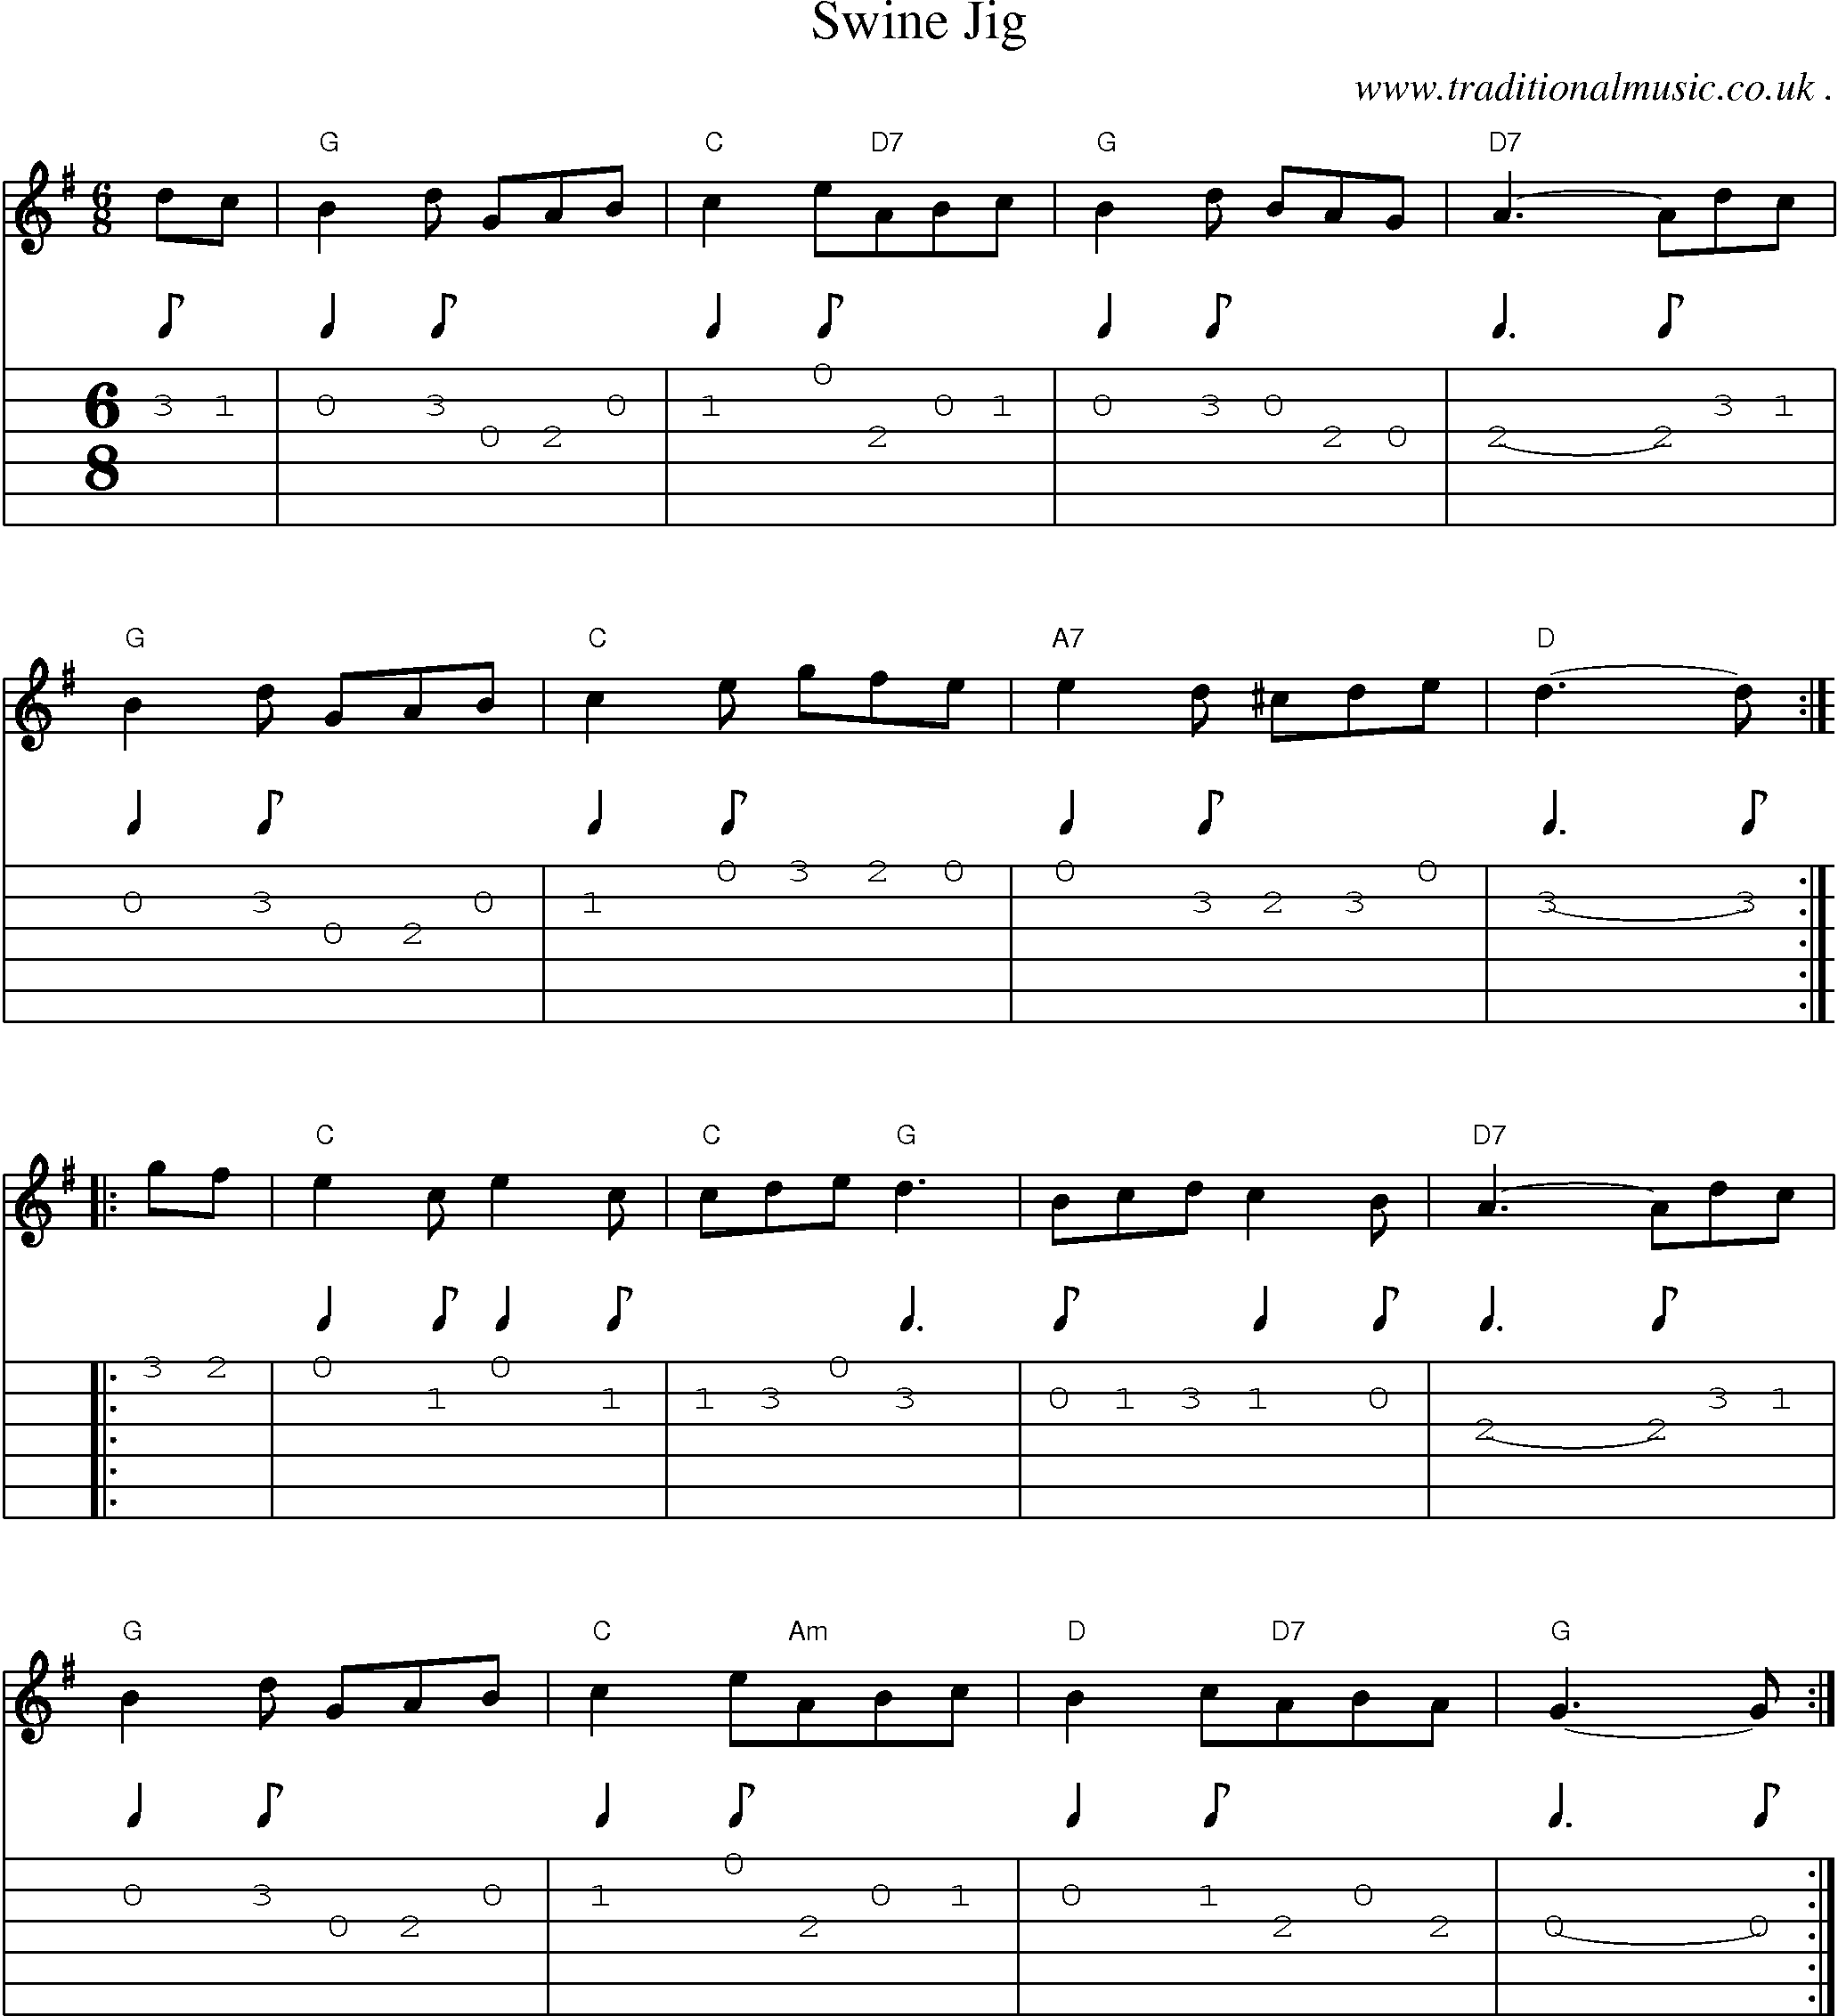 Sheet-Music and Guitar Tabs for Swine Jig